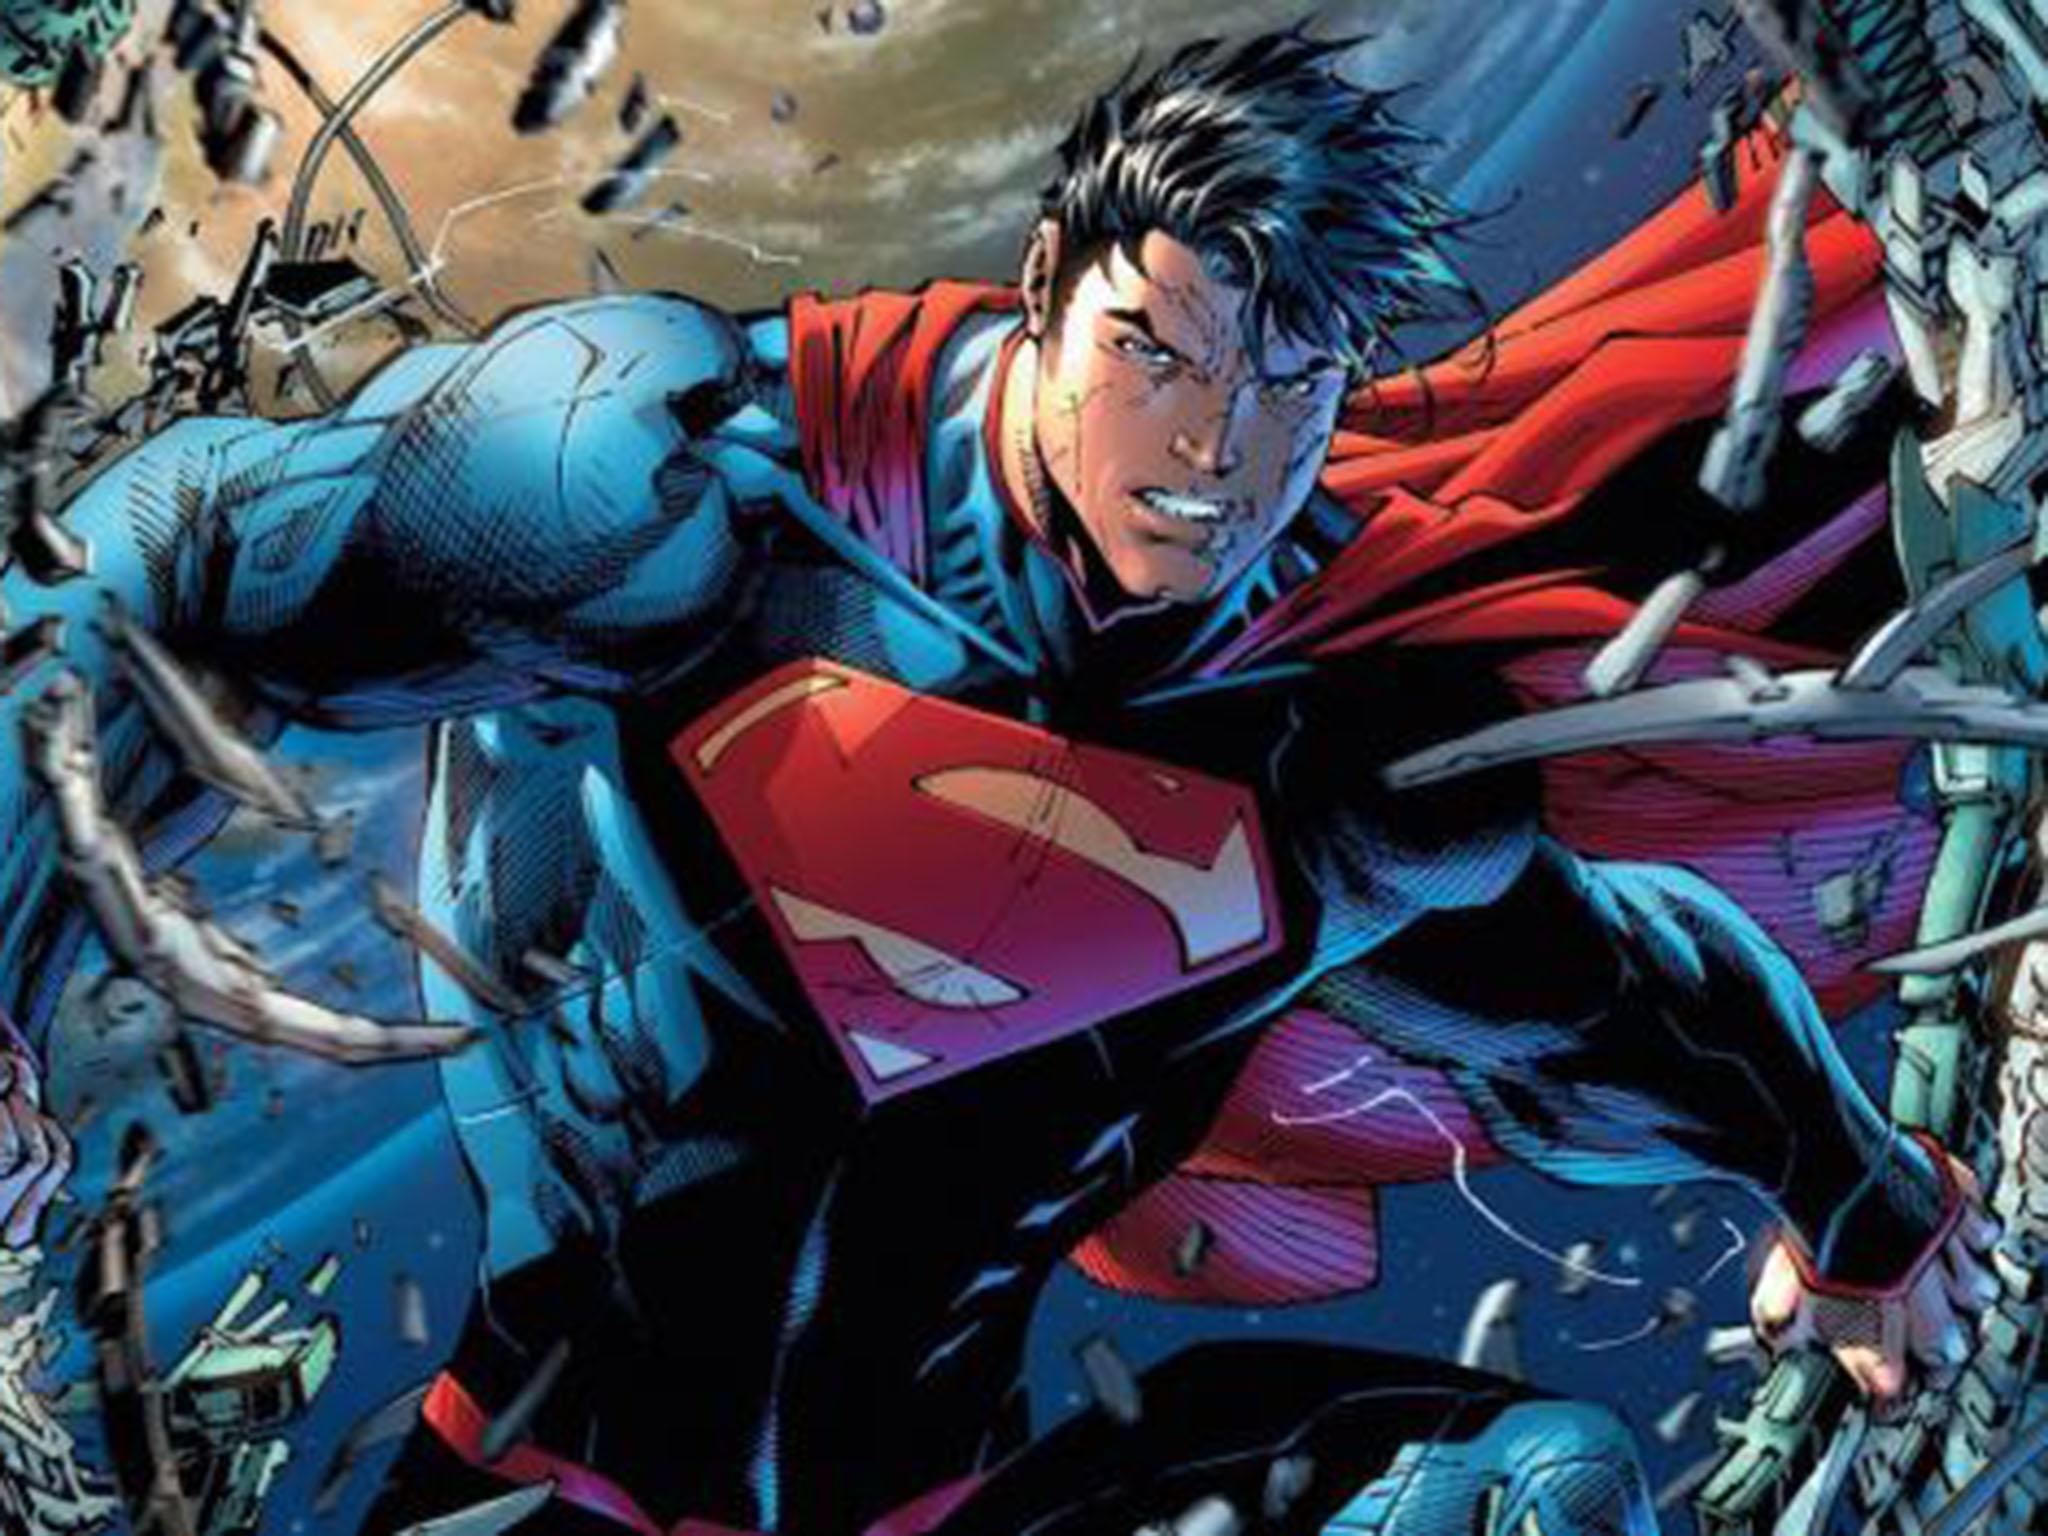 Superman is a refugee who found asylum in America